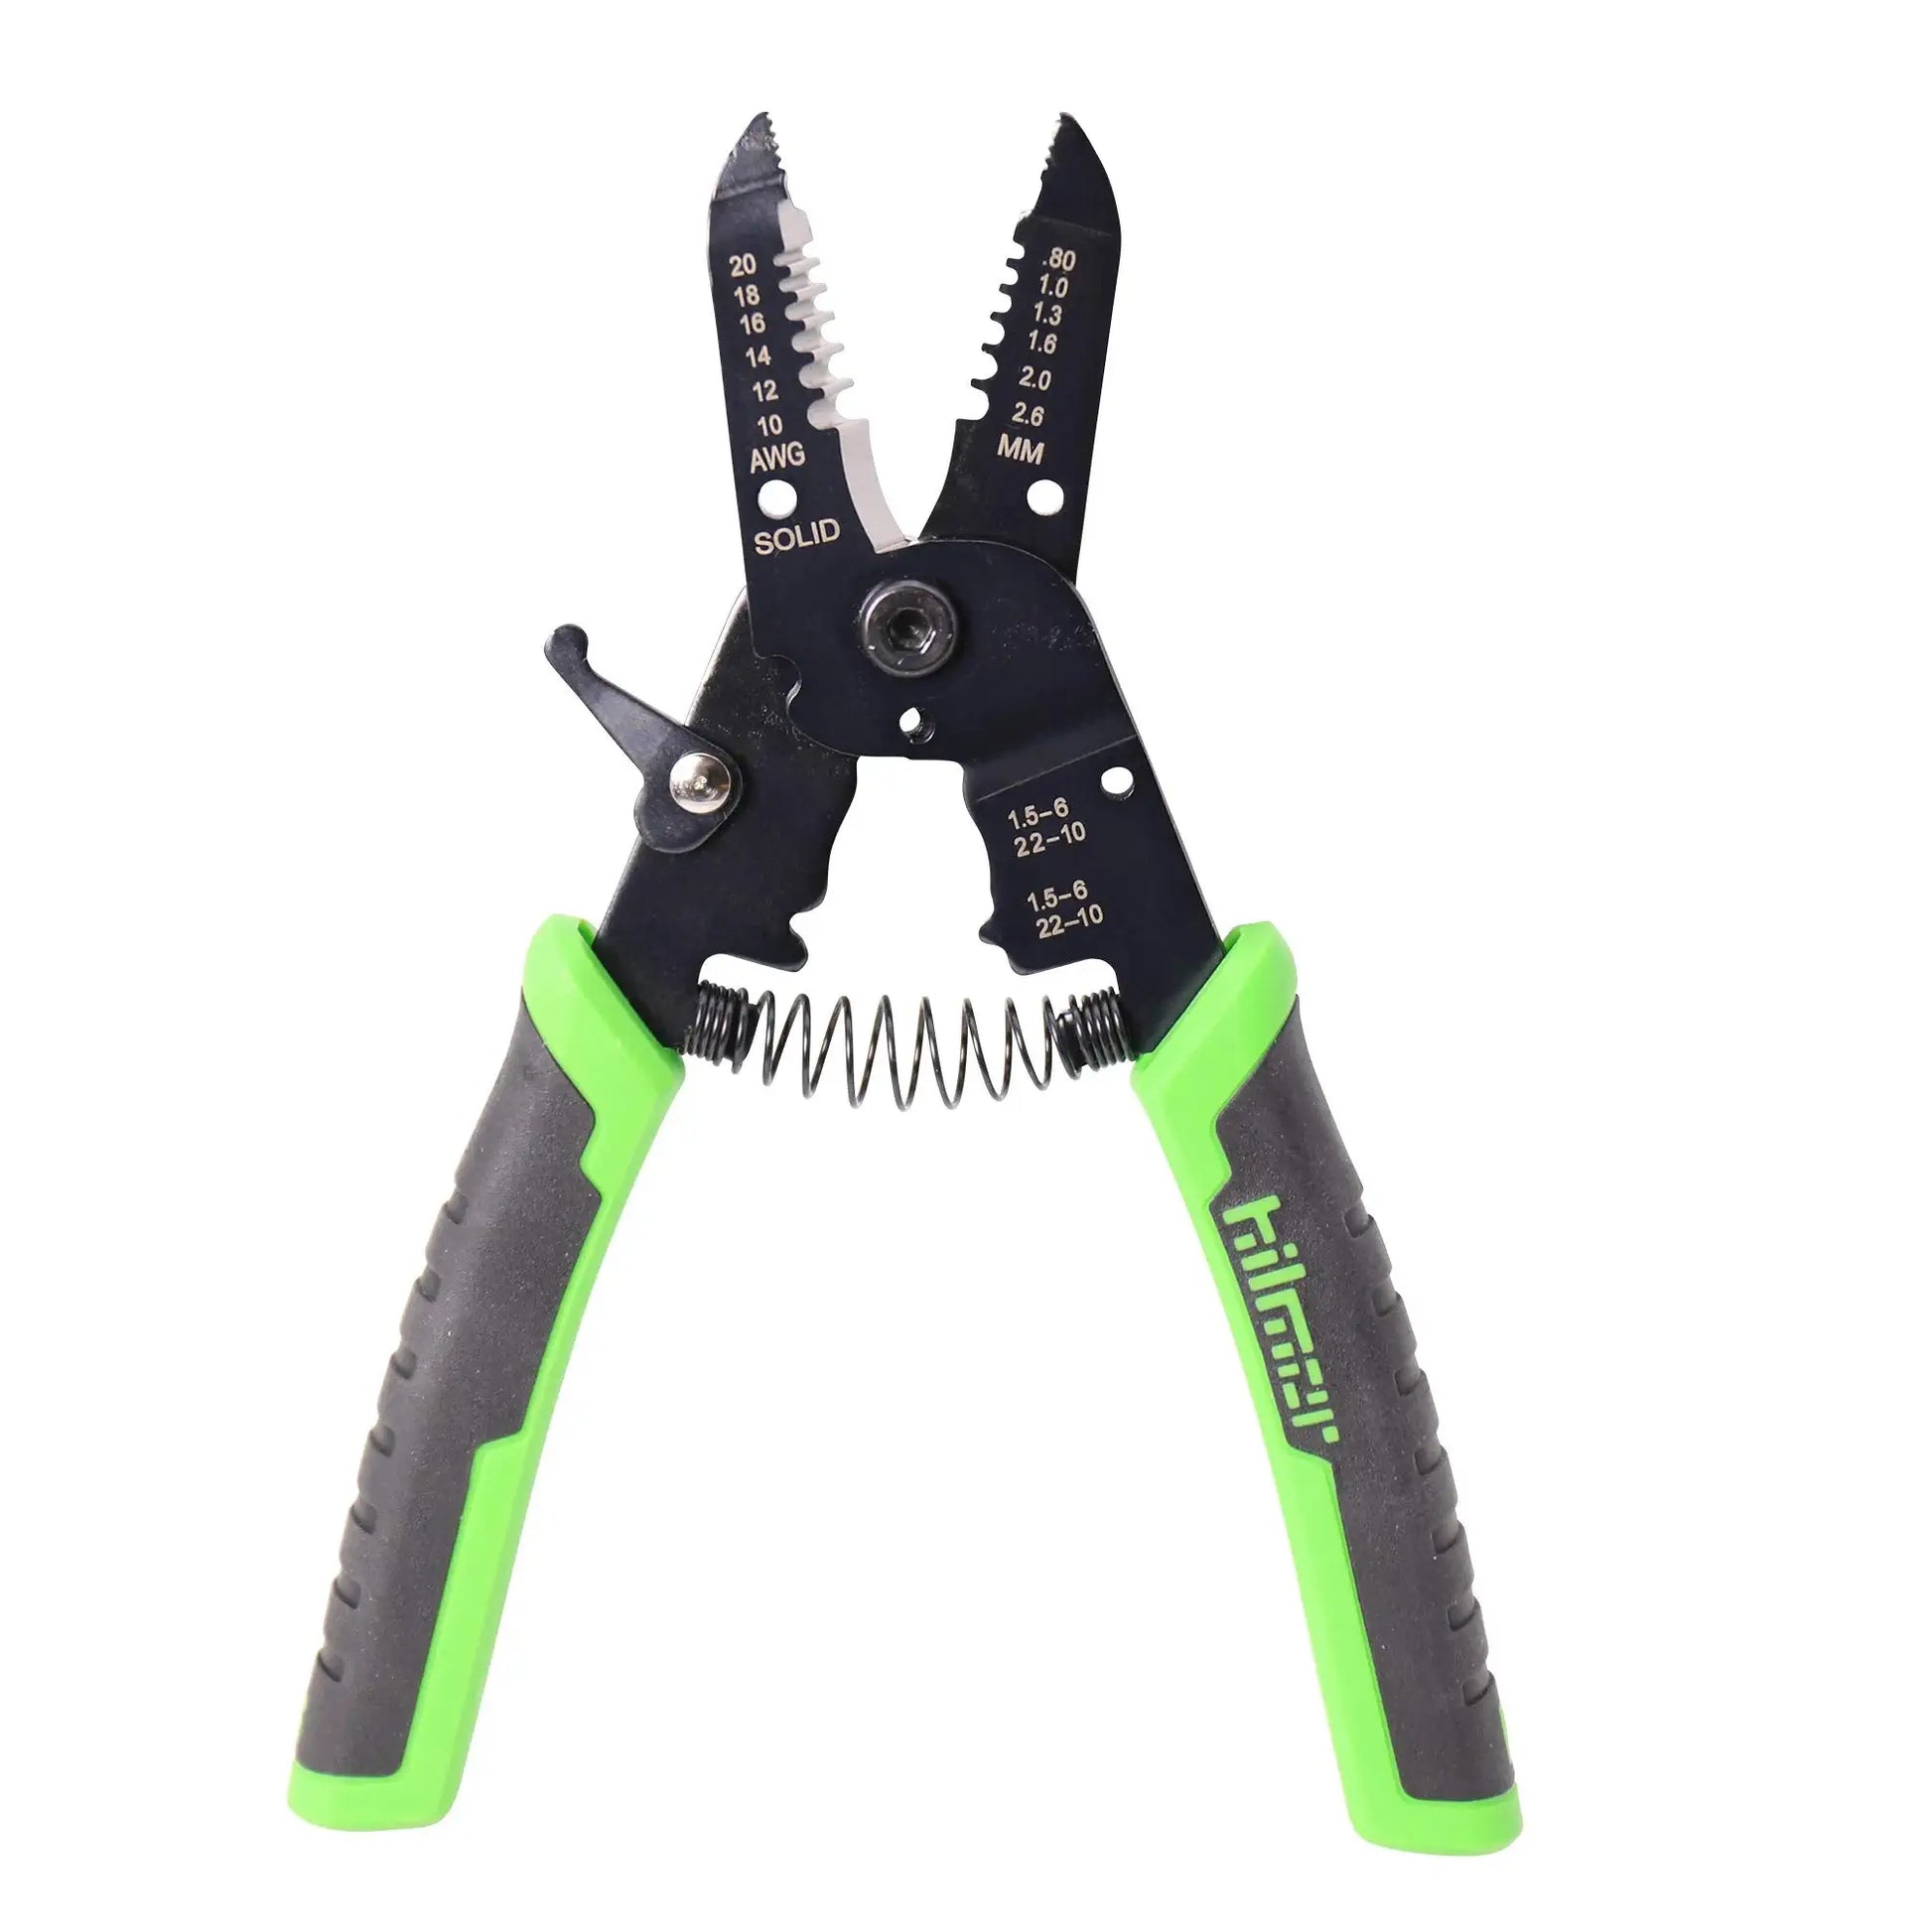 Hilmor 7 Wire Stripper with Rubber Handle Grip, Black & Green, WS7 1885426 Fifth